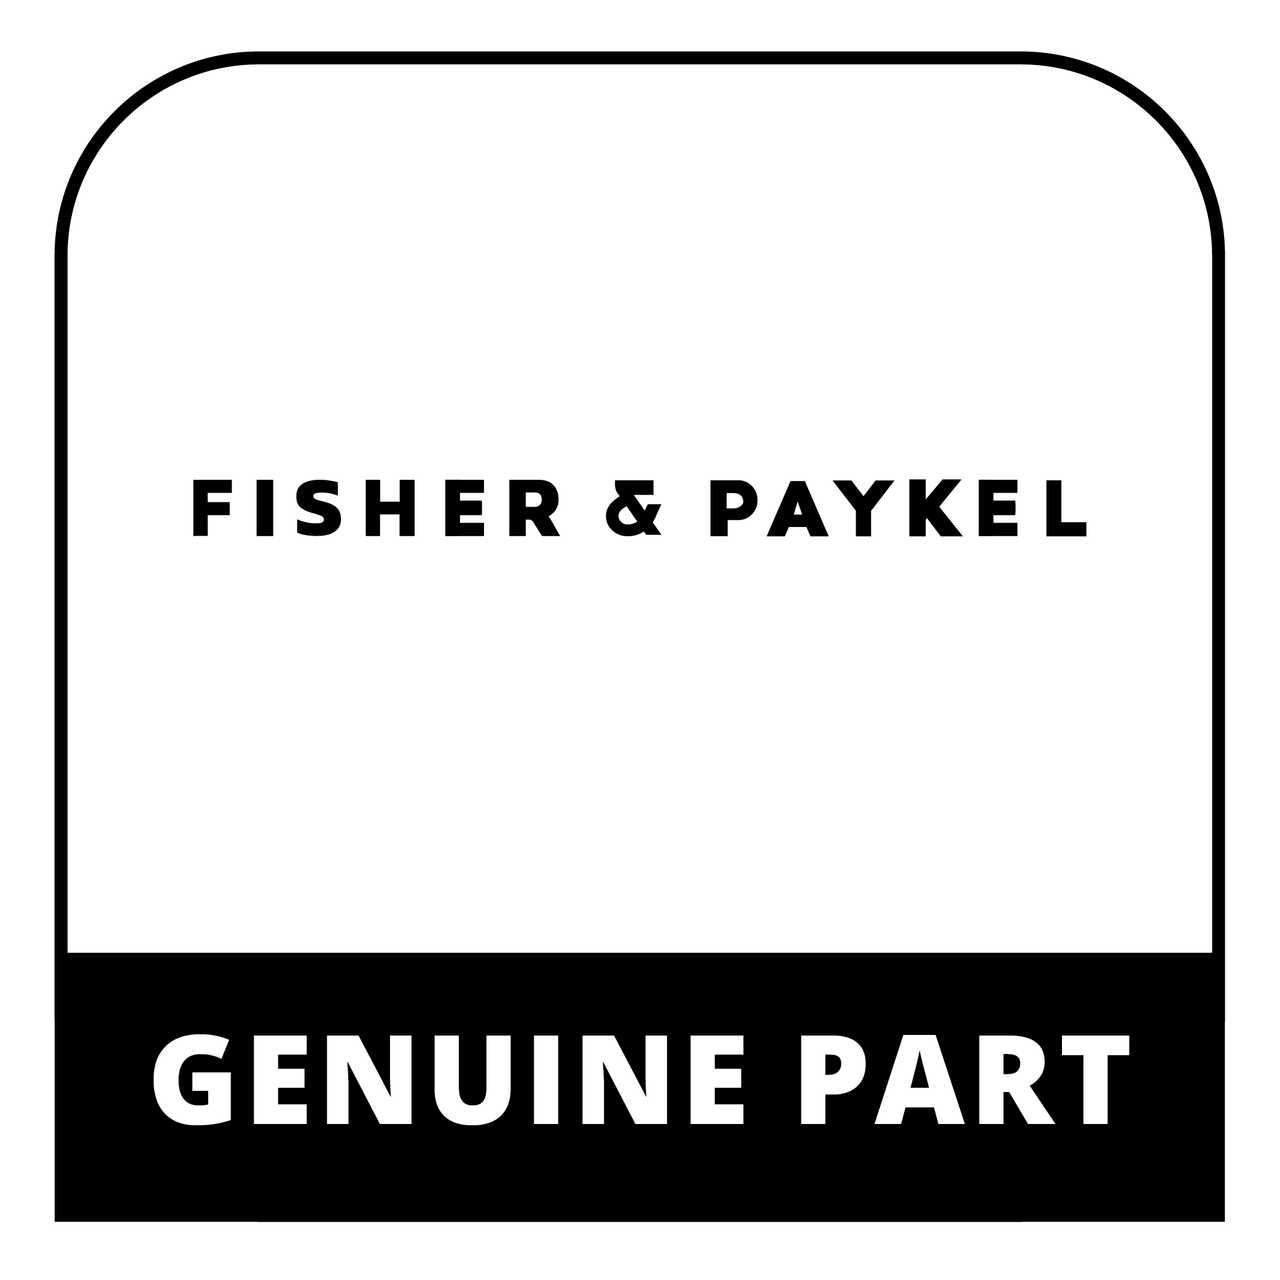 Fisher & Paykel 574207 - Red Light-Cover On Oven Panel - Genuine Fisher & Paykel (DCS) Part